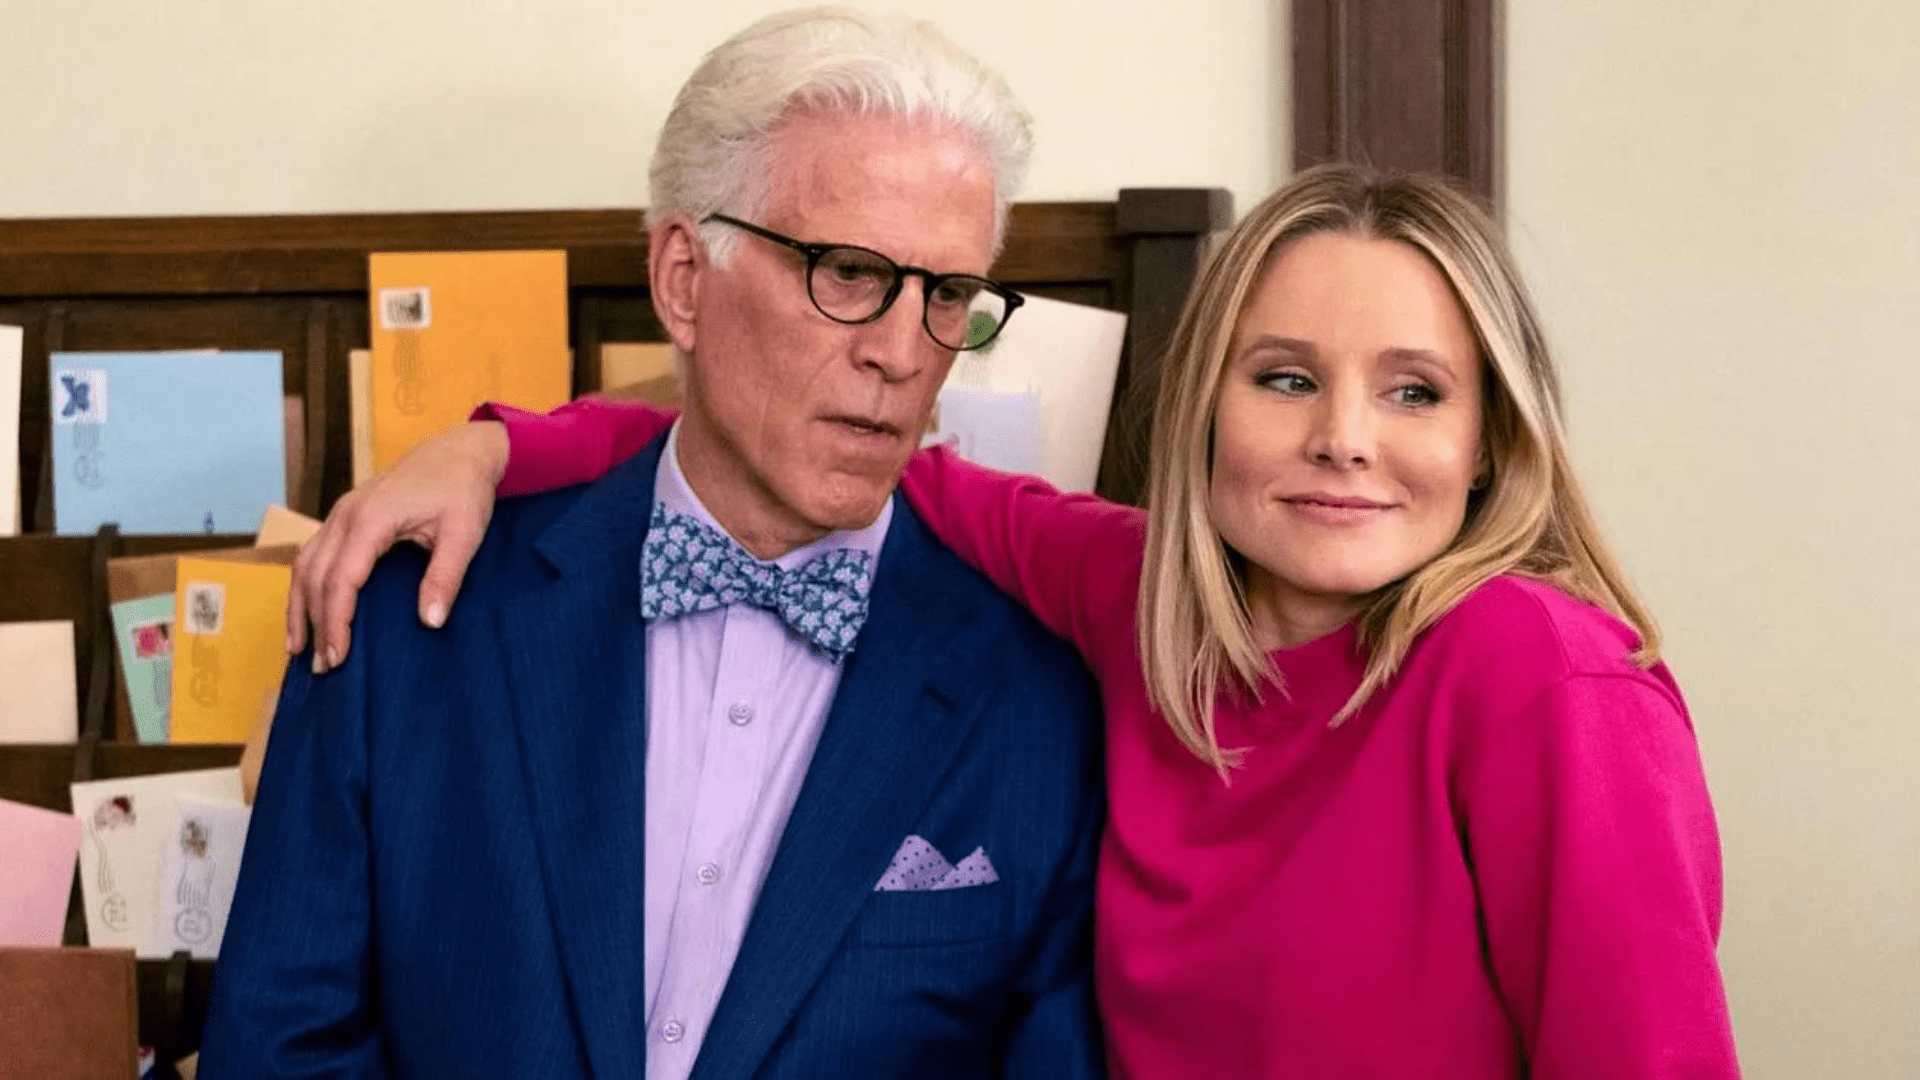 The Good Place Facts - The Good Place Facts That Every Netflix Subscriber Should Know